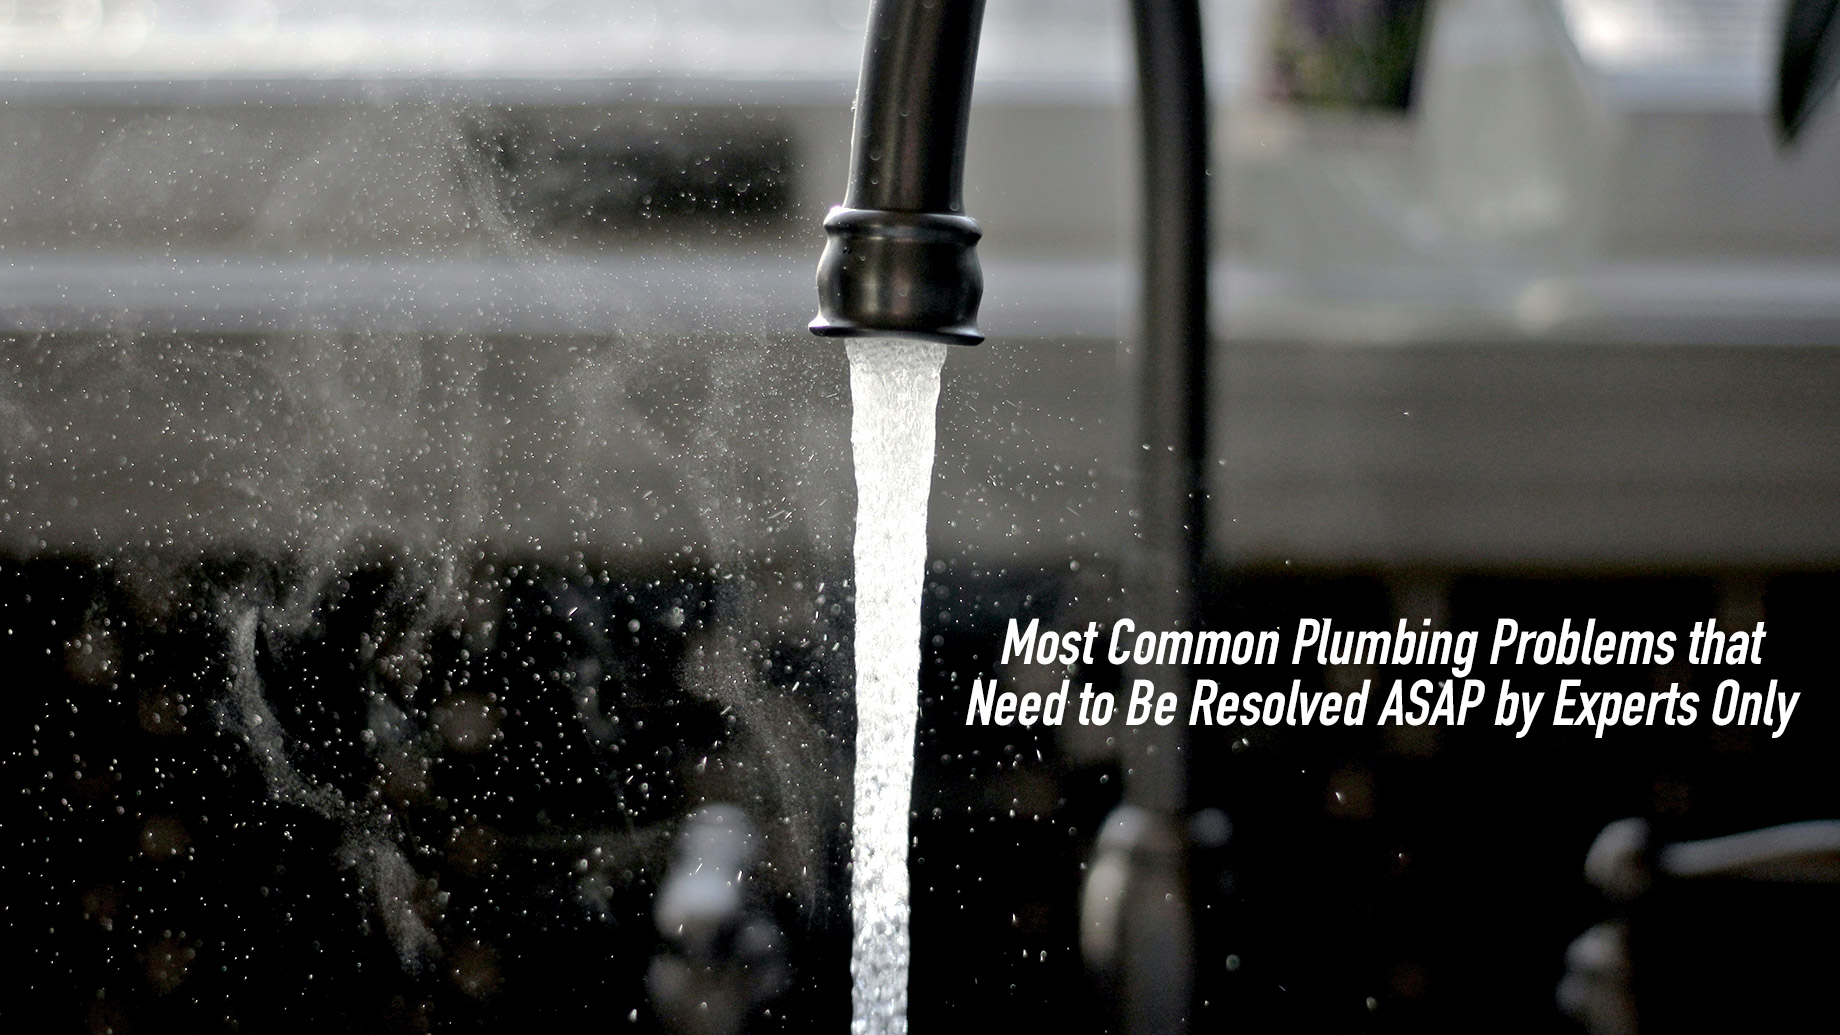 Most Common Plumbing Problems that Need to Be Resolved ASAP by Experts Only